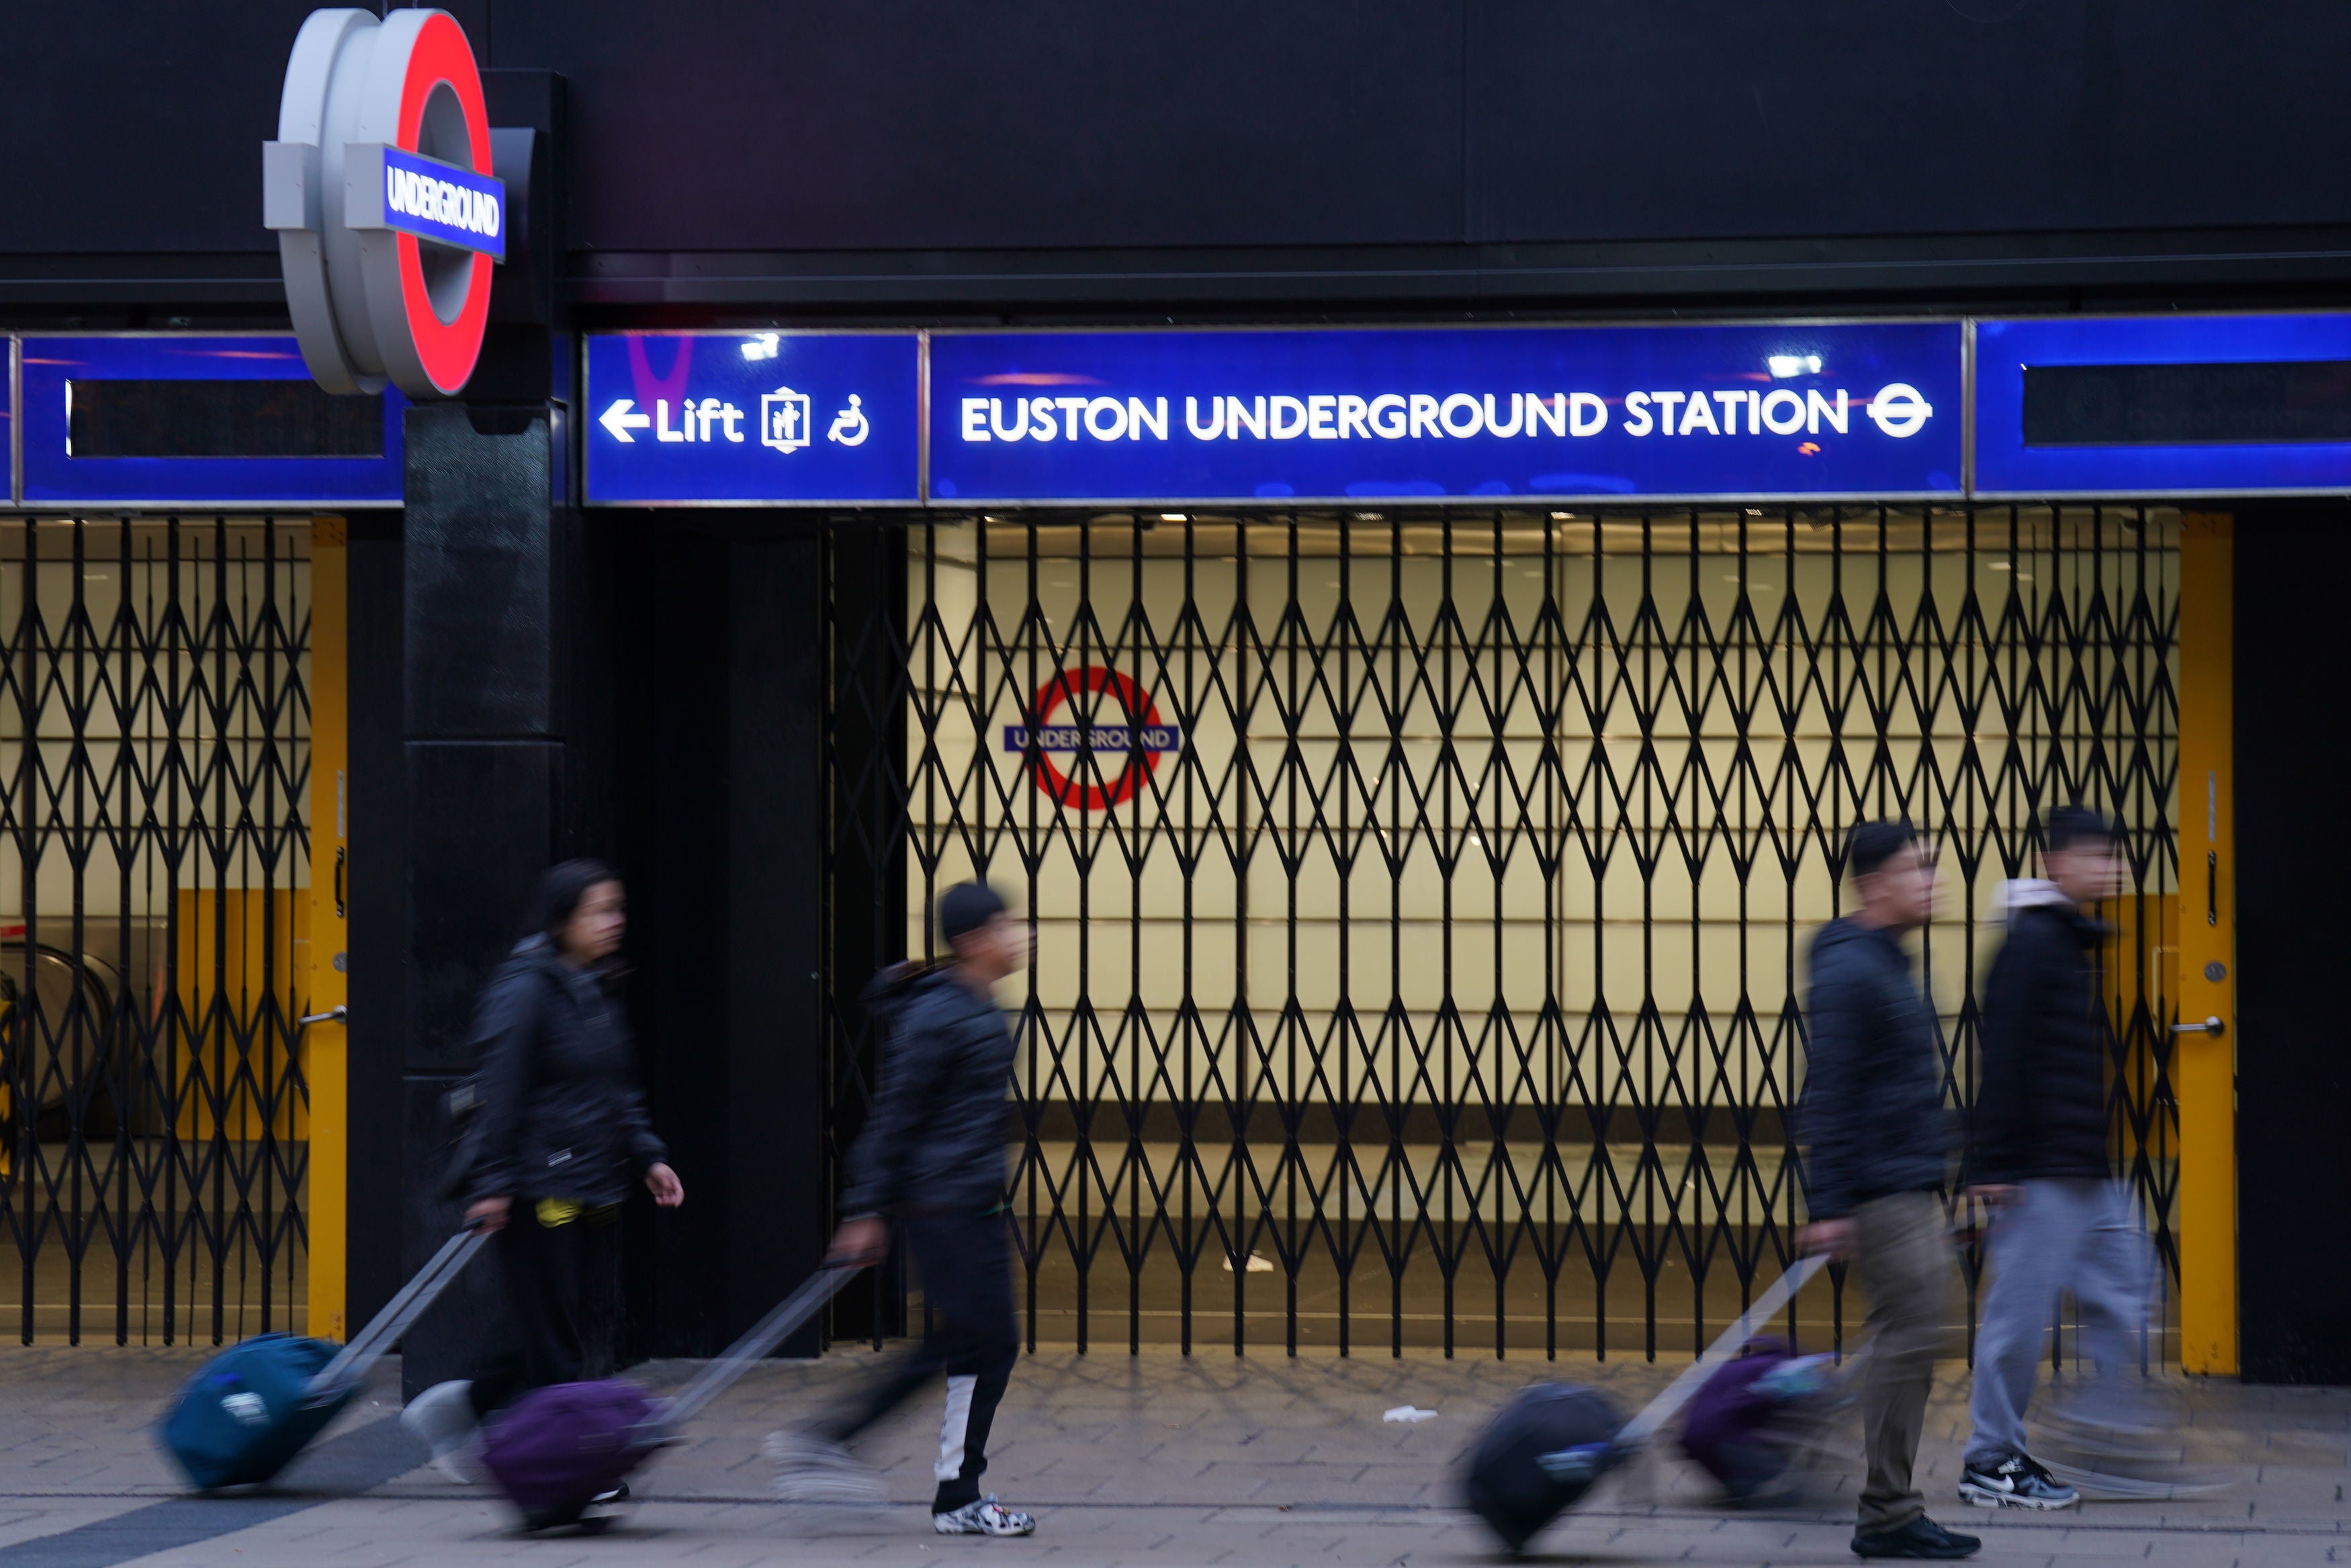 People walk past the closed shutters at the entrance to Euston underground station in central London,